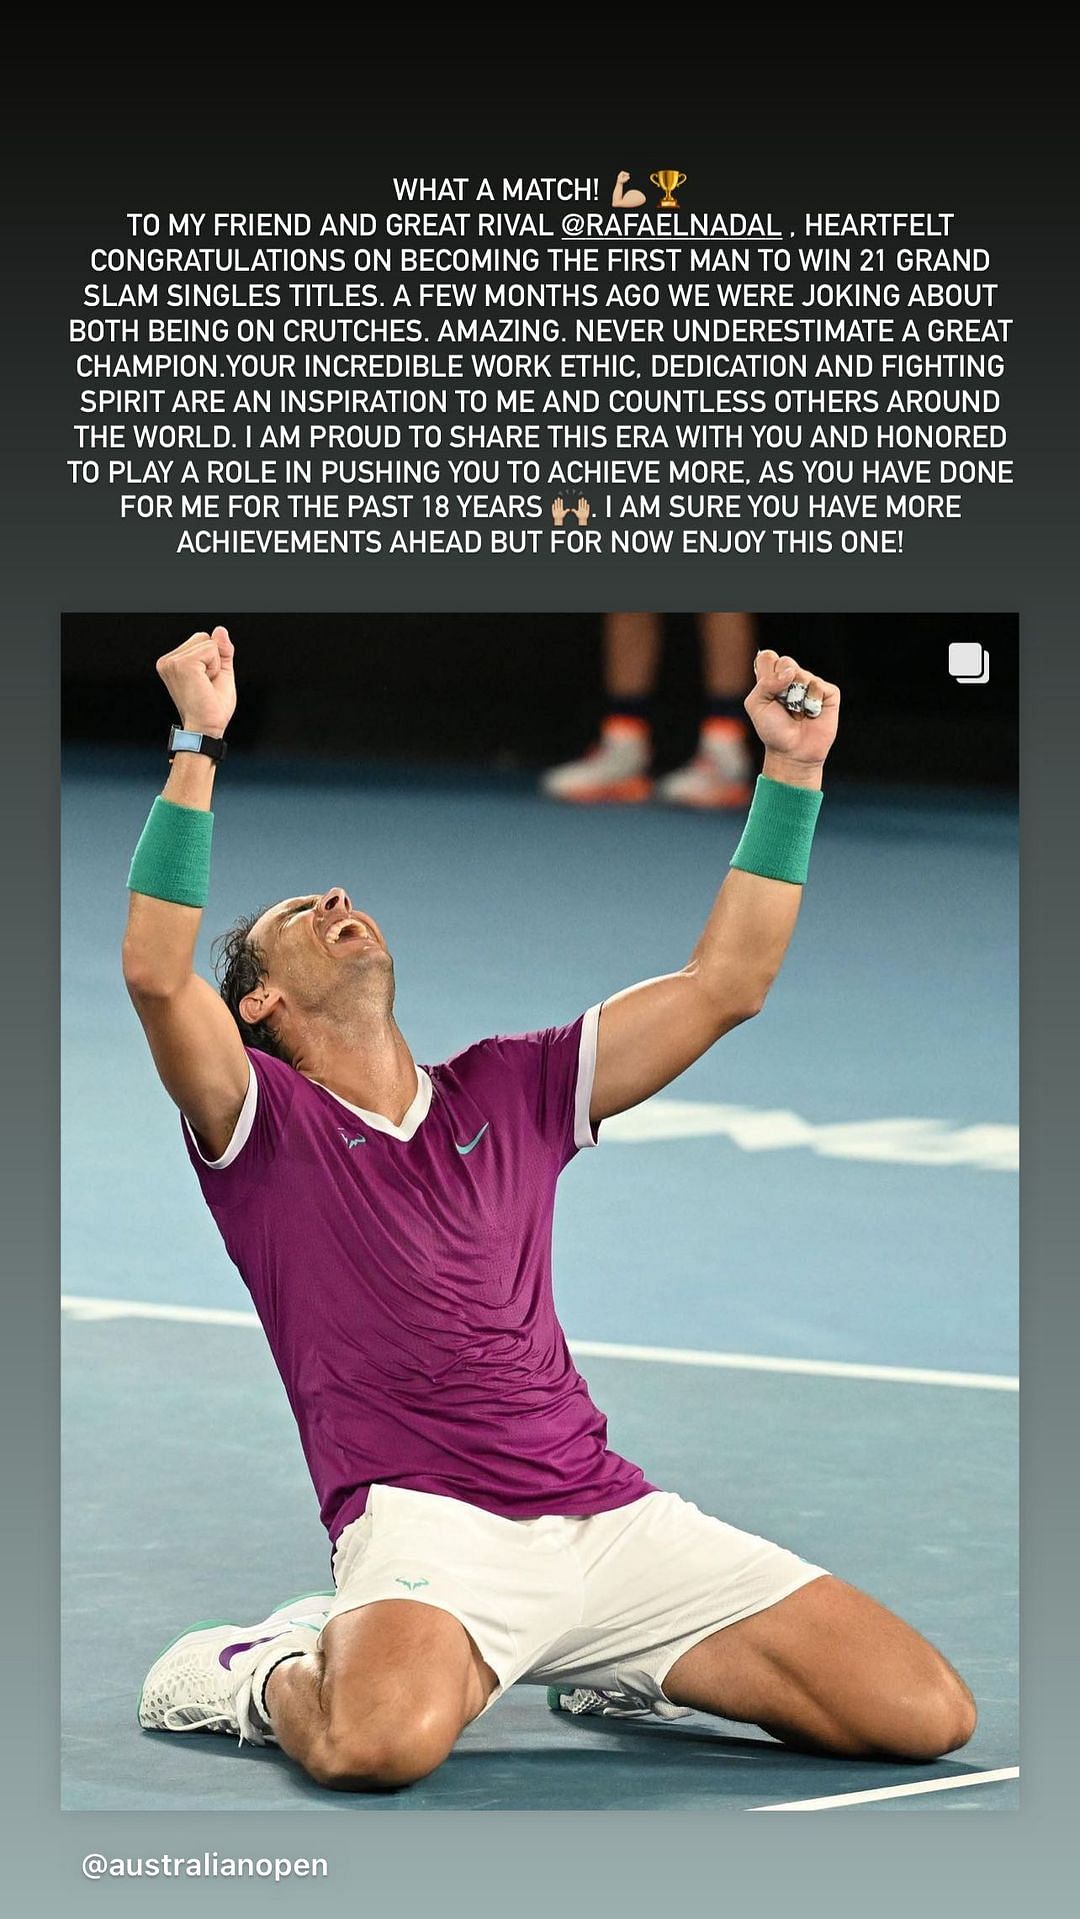 Rafael Nadal has become the first male player to win 21 Grand Slam titles.